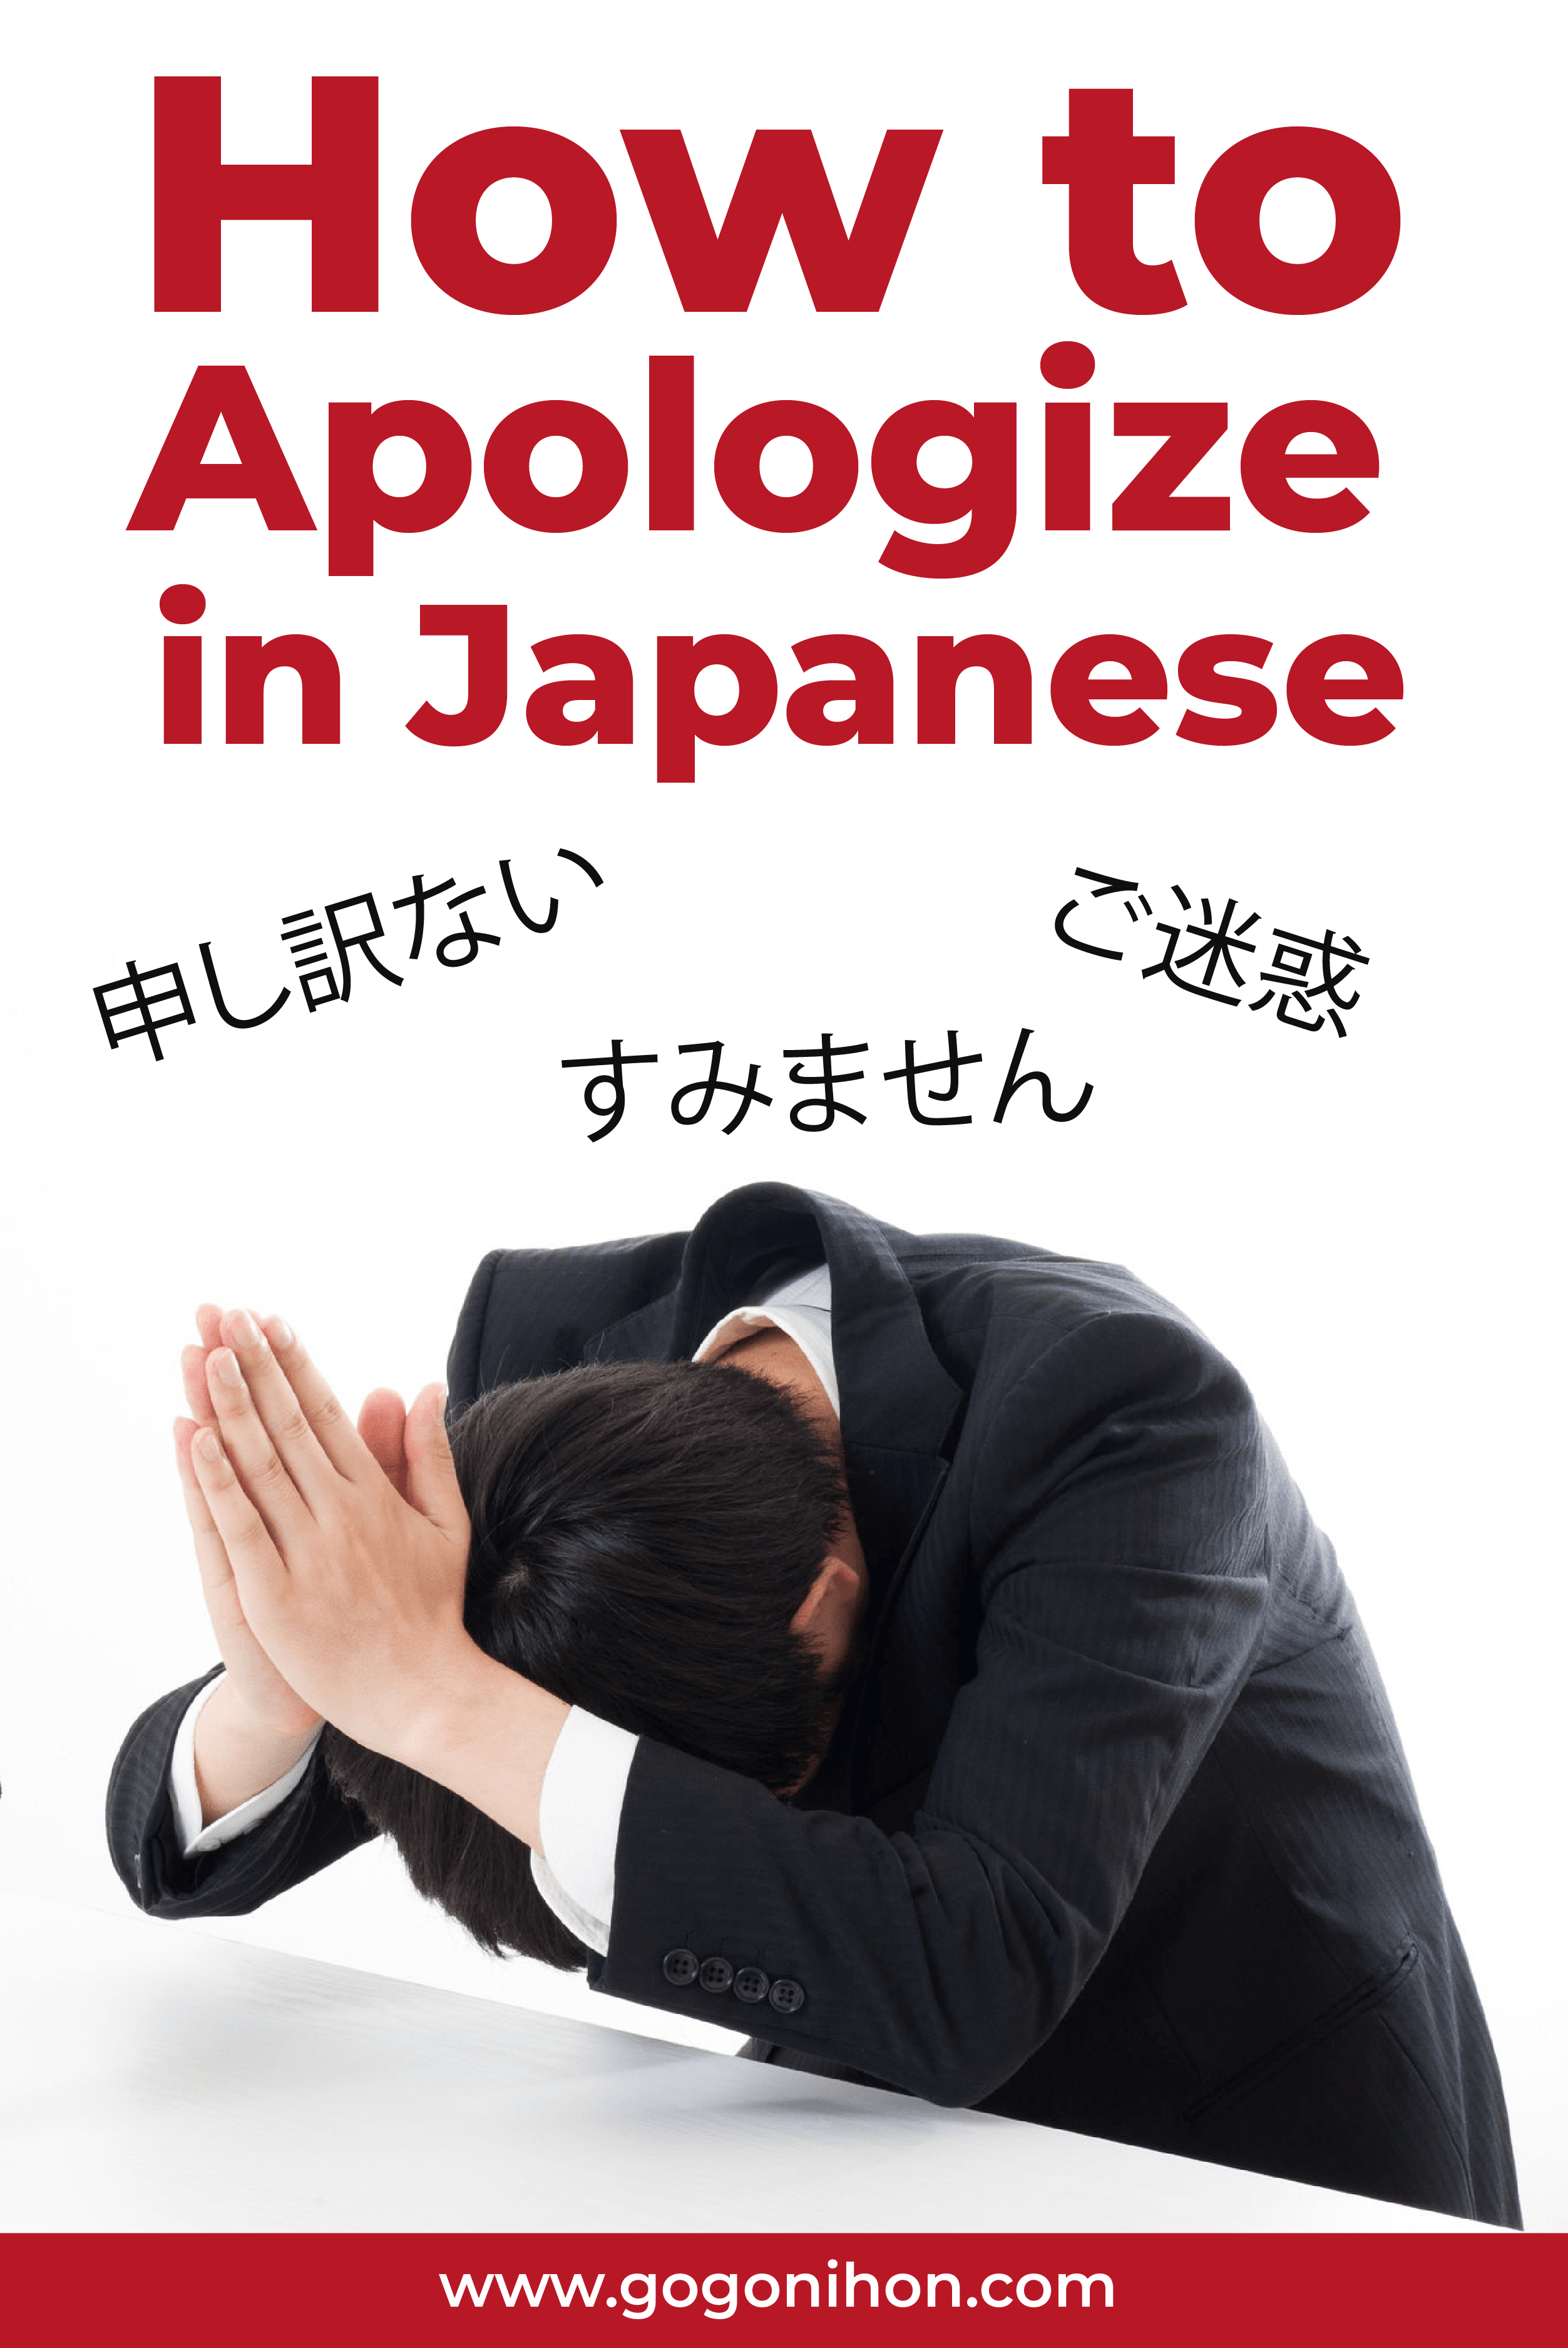 Ways to say “I’m Sorry” in Japanese – Proper Ways to Apologize 4